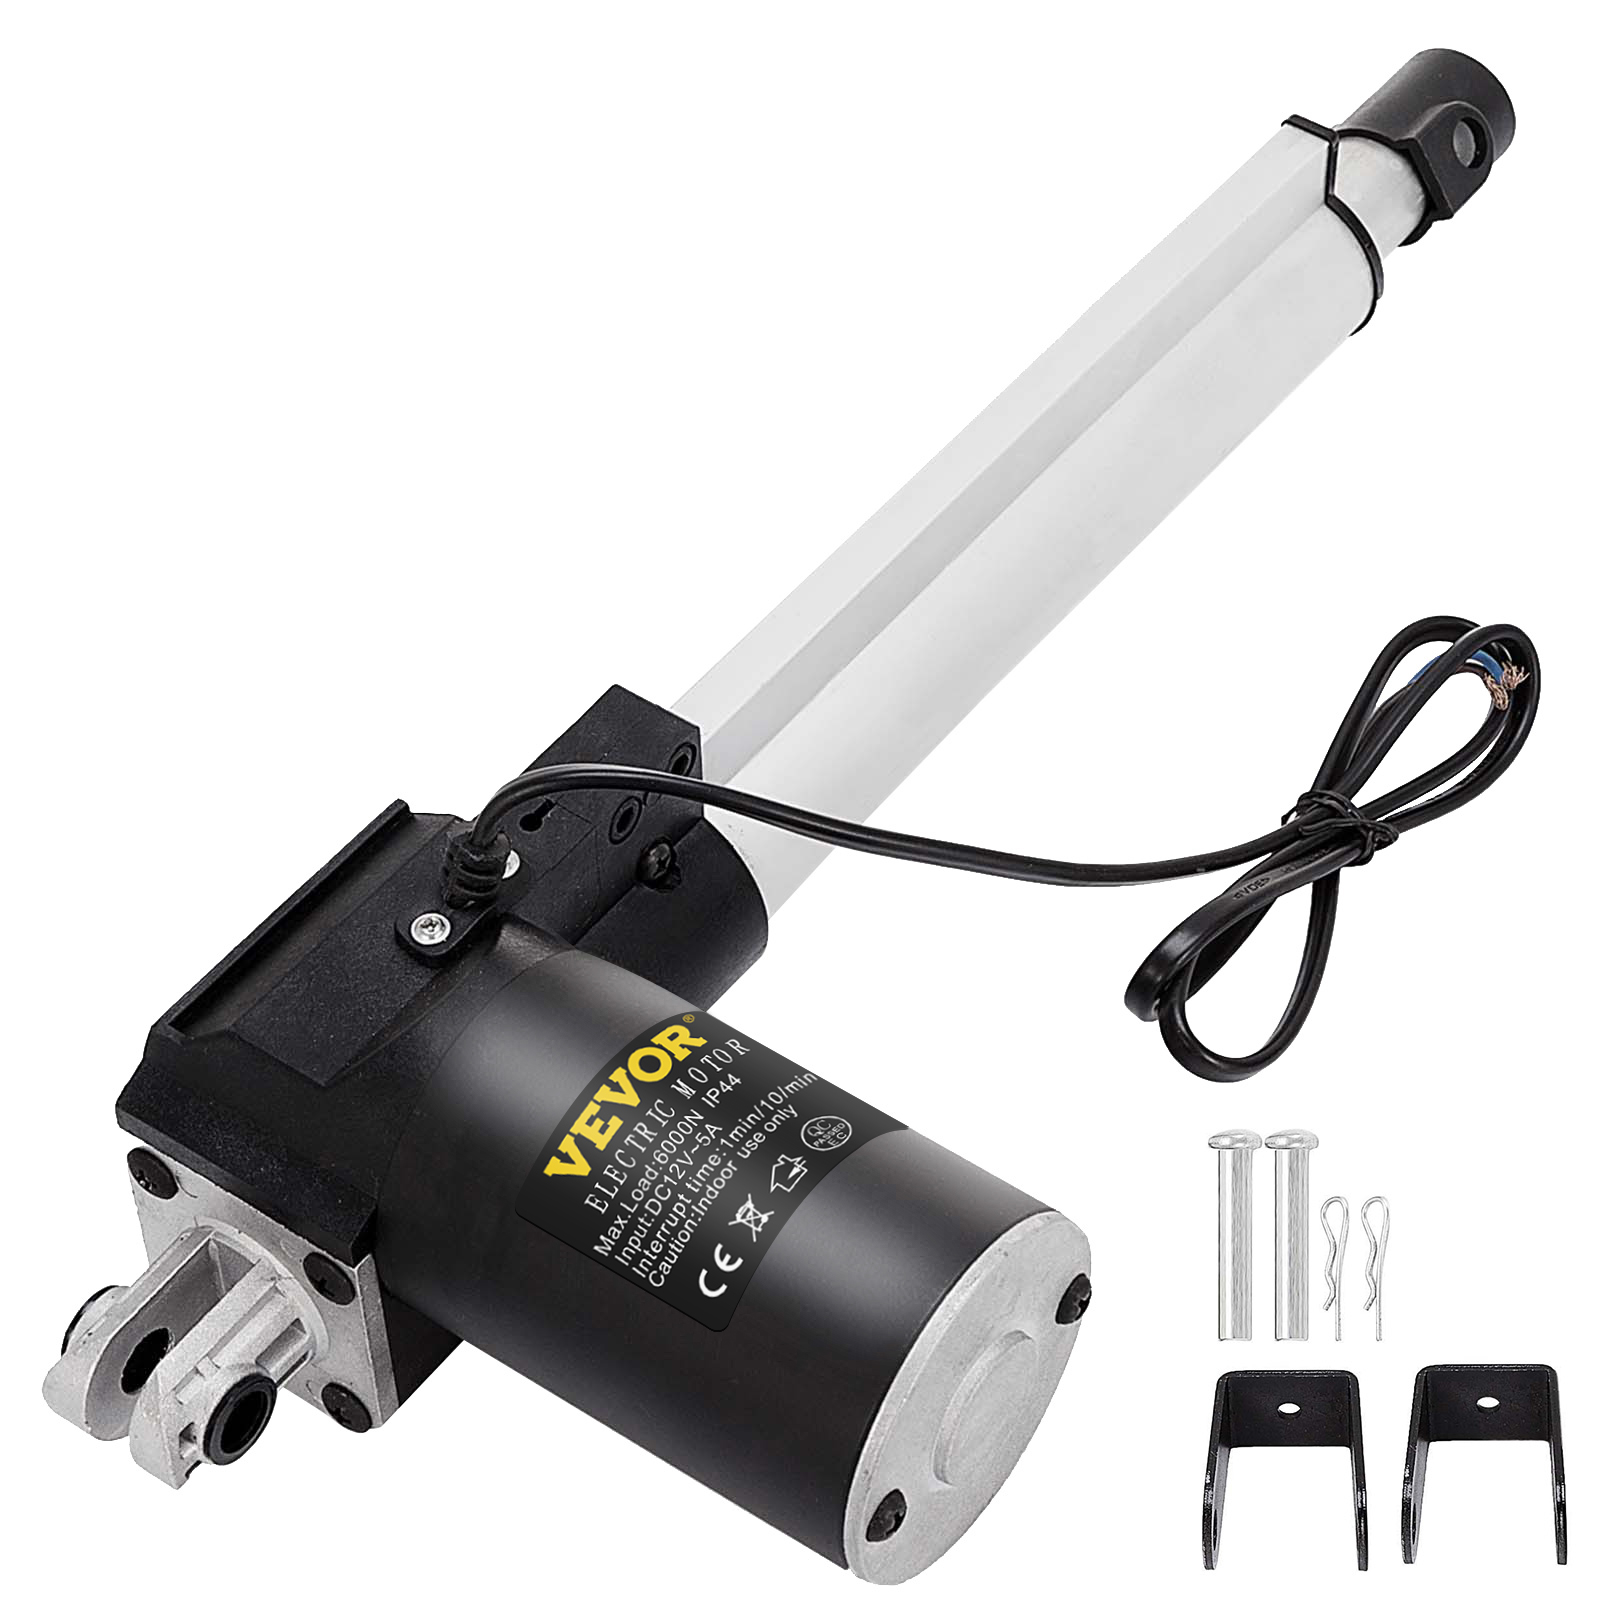 2 Dual 16" Inch Stroke Linear Actuators 330 Pound Max Lift DC 12V Electric Motor 